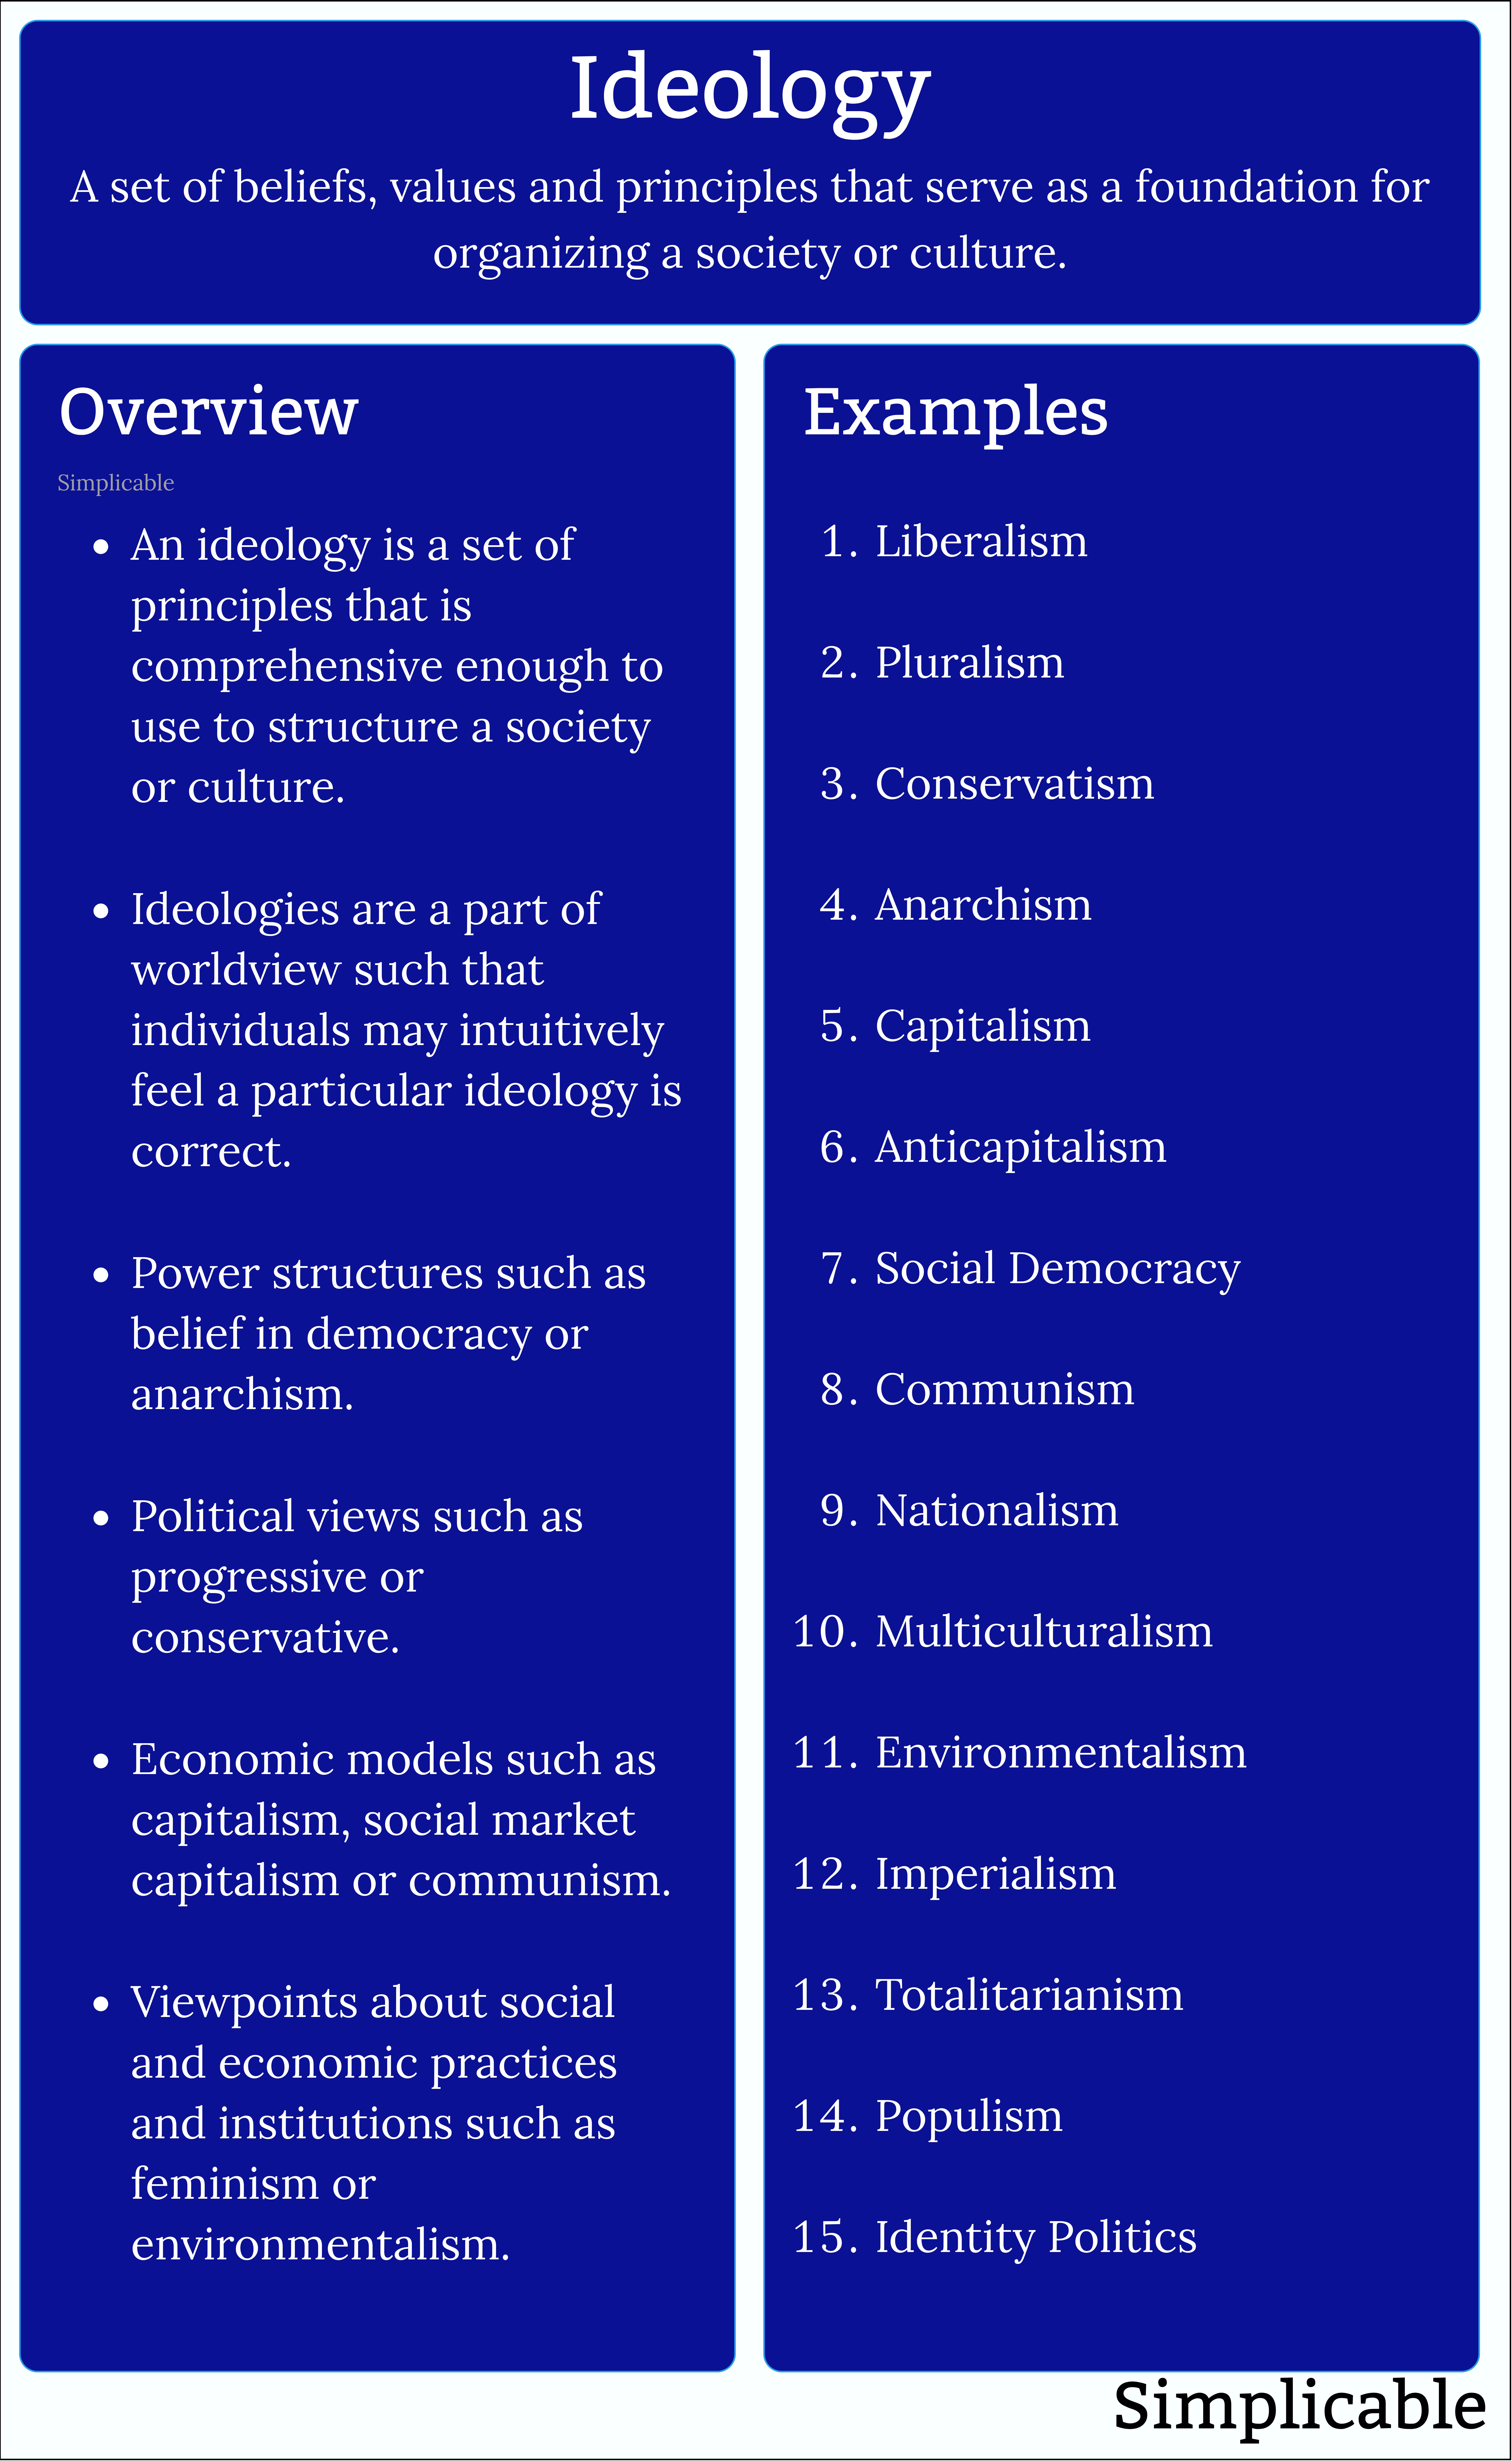 ideology overview and examples